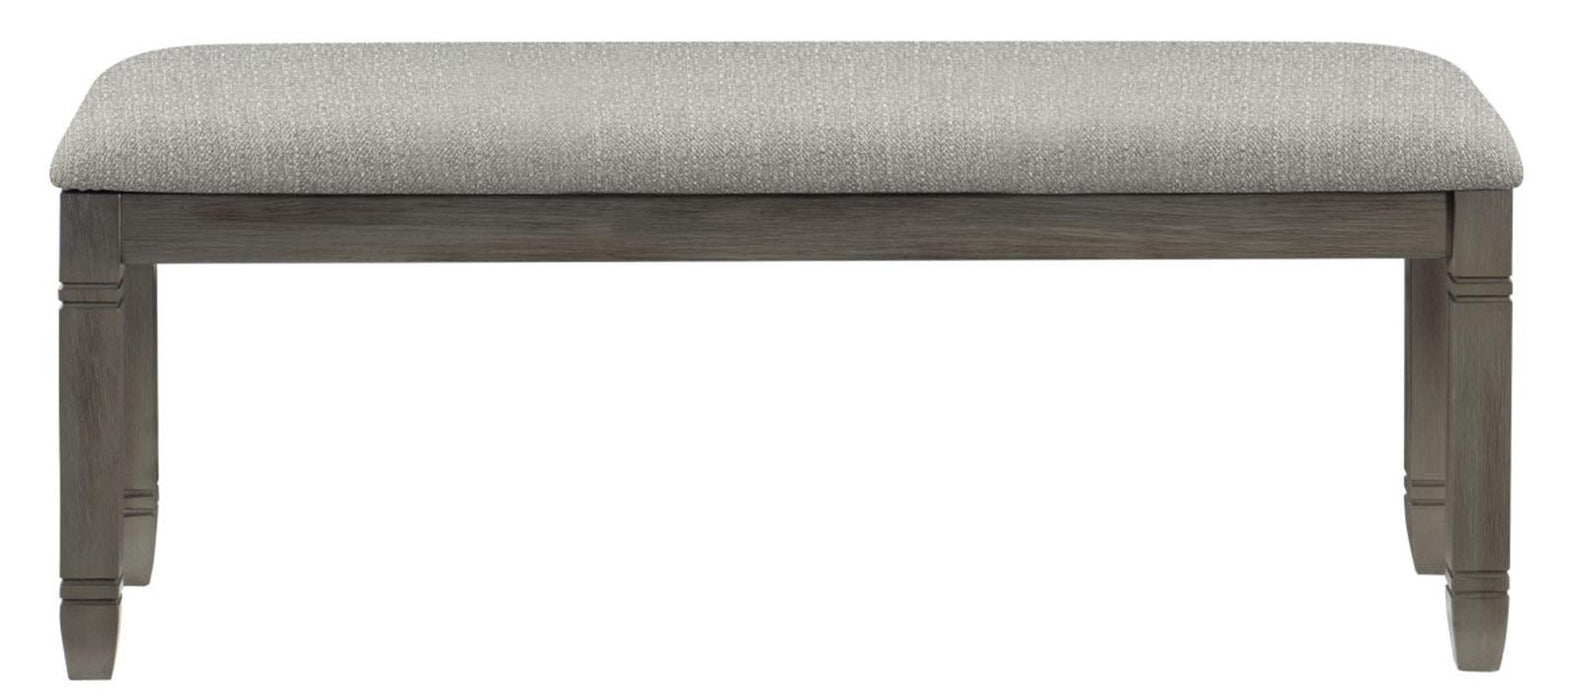 Homelegance Granby Bench in Antique Gray 5627GY-13 image